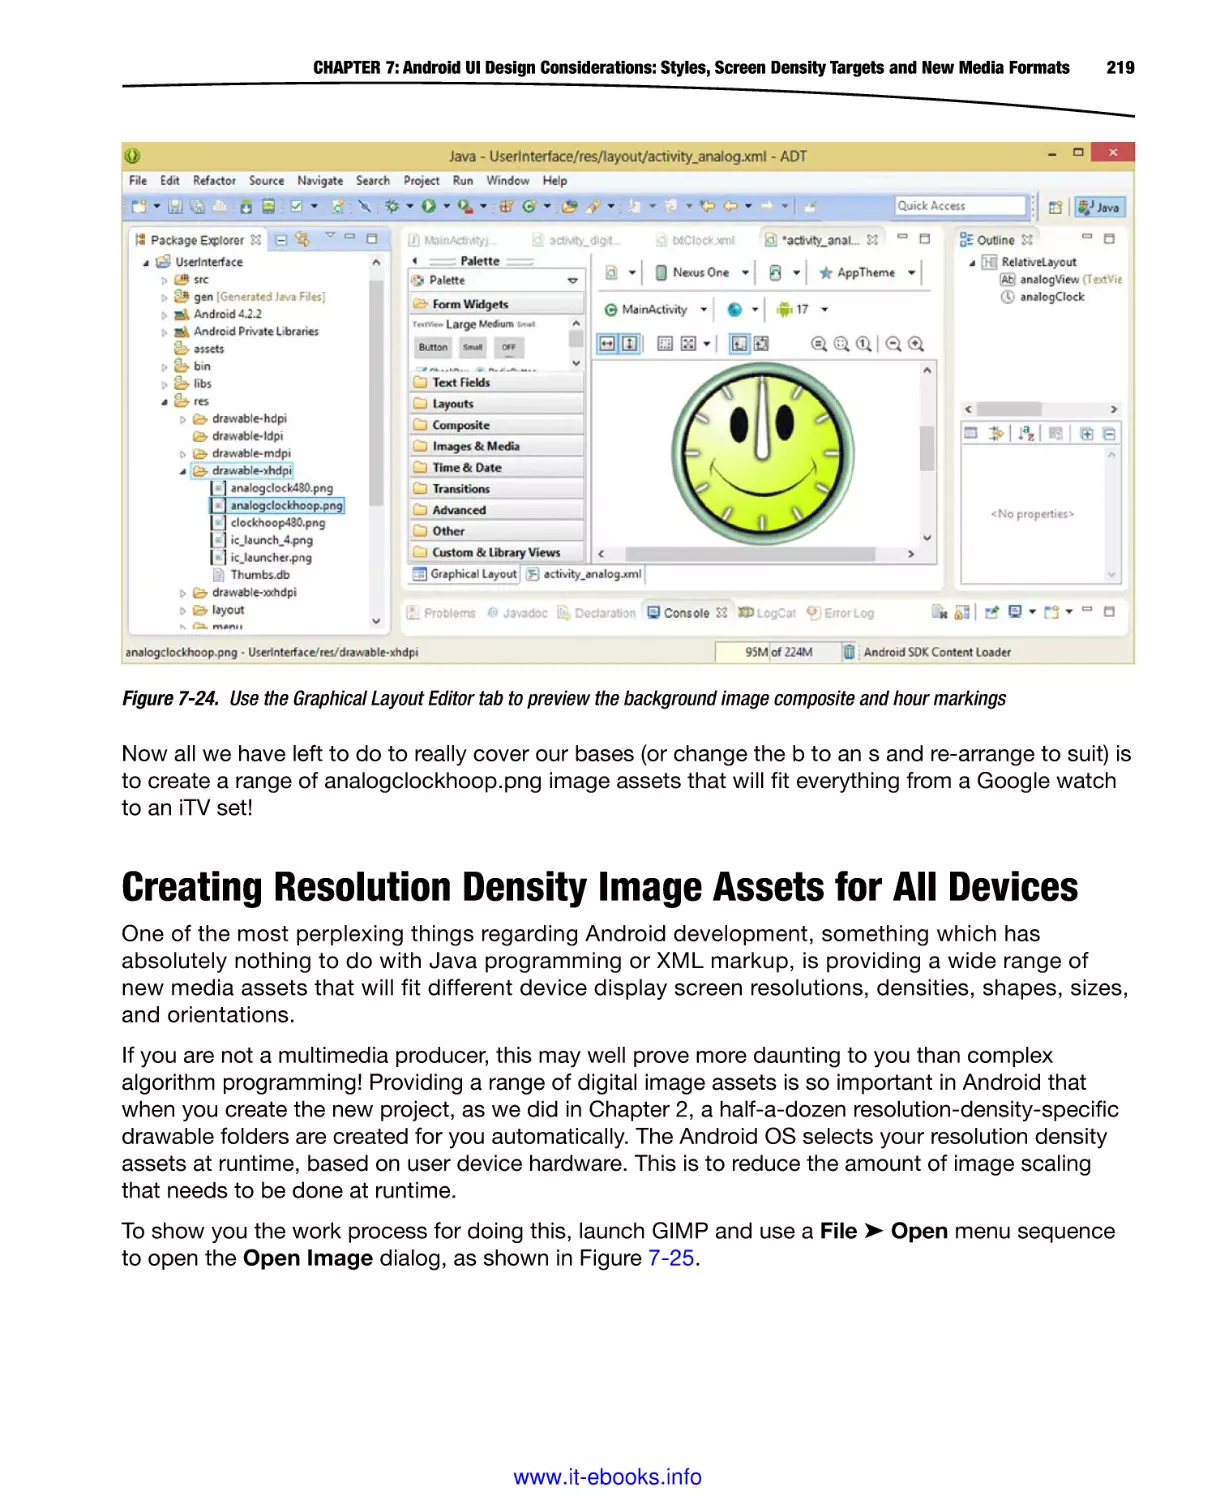 Creating Resolution Density Image Assets for All Devices